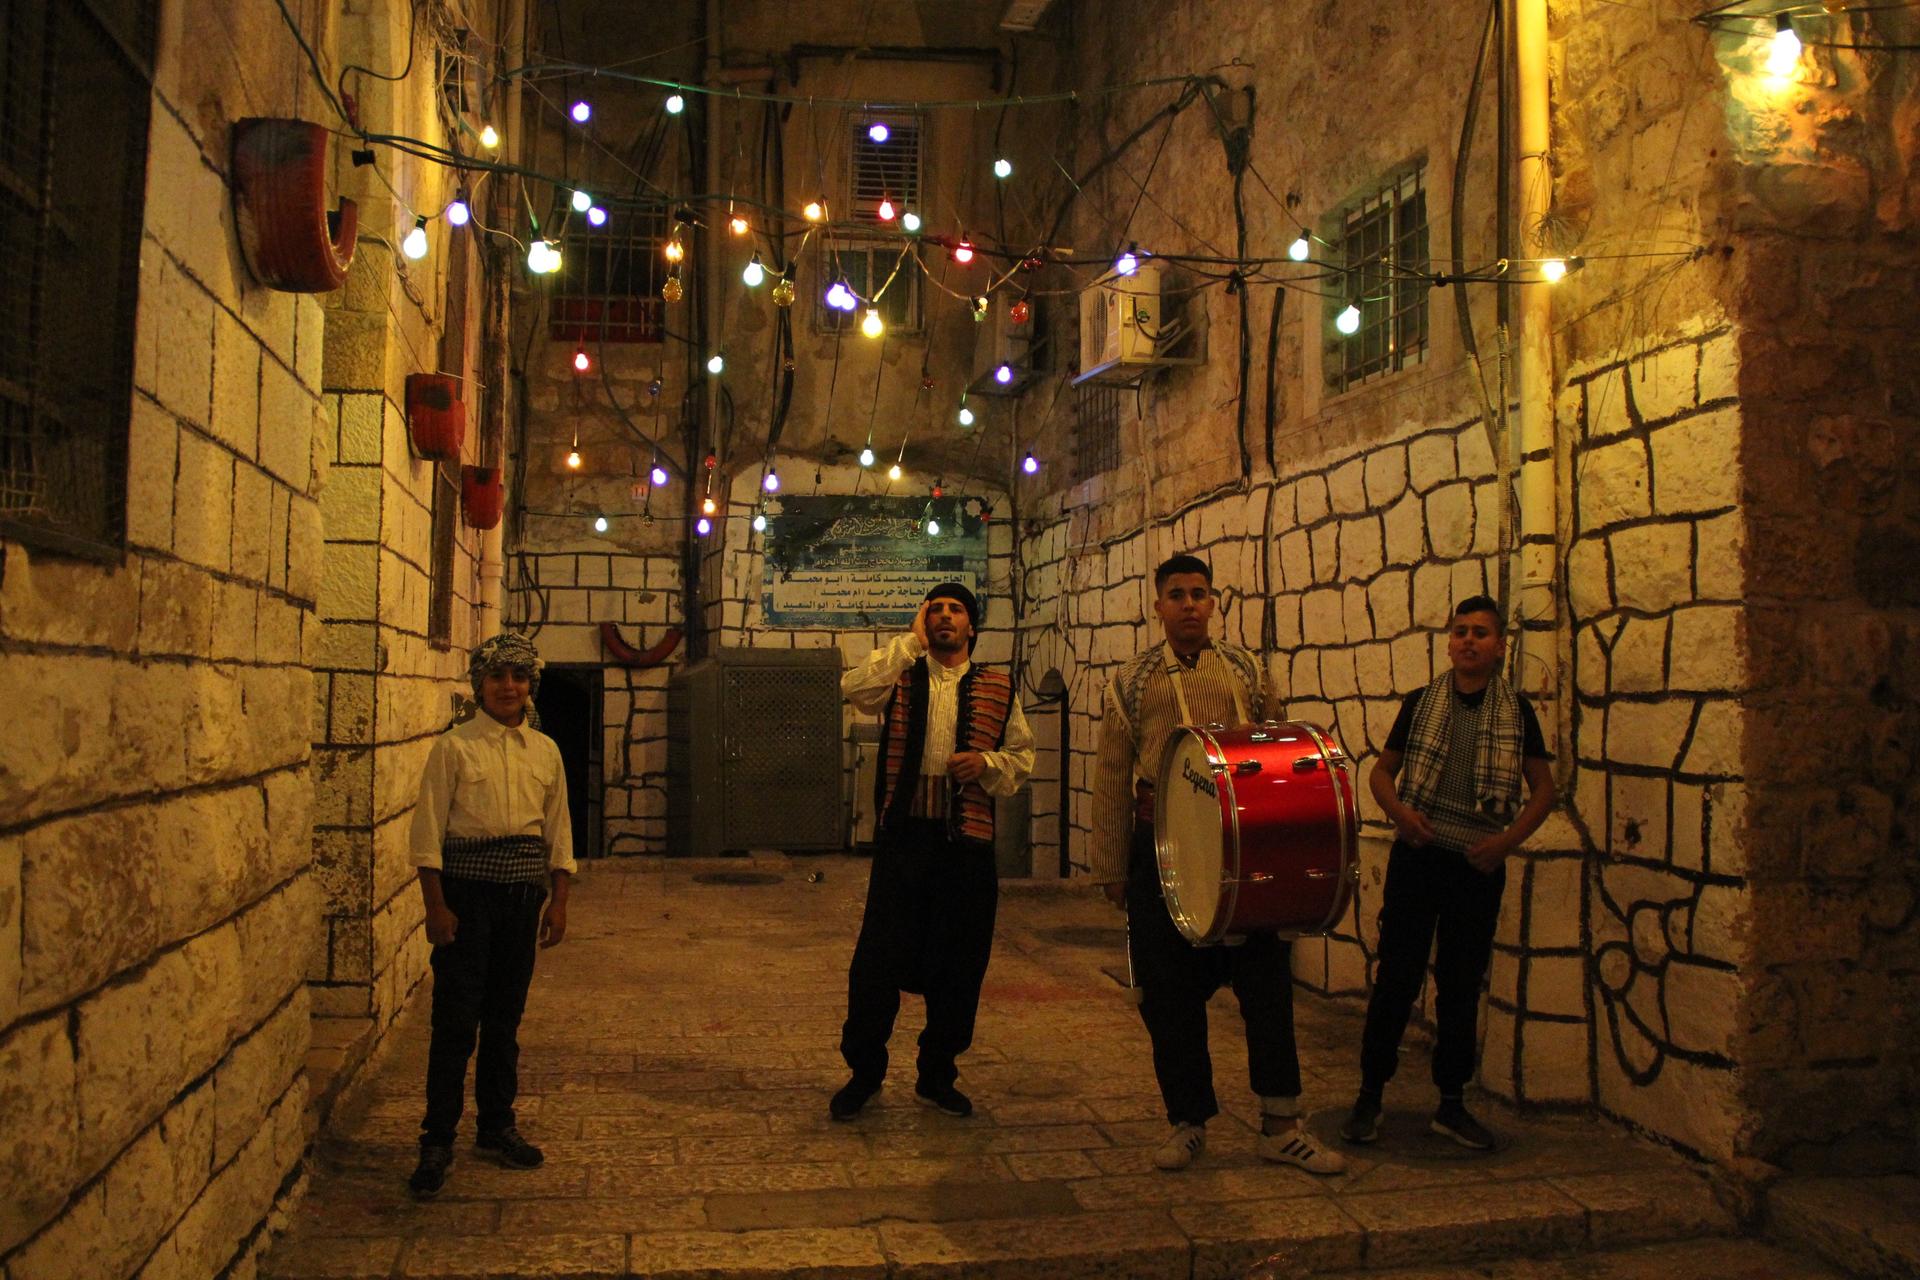 Young Palestinians in Jerusalem's Old City volunteer as public wakers, called musaharati, to sing and drum in city streets during Ramadan